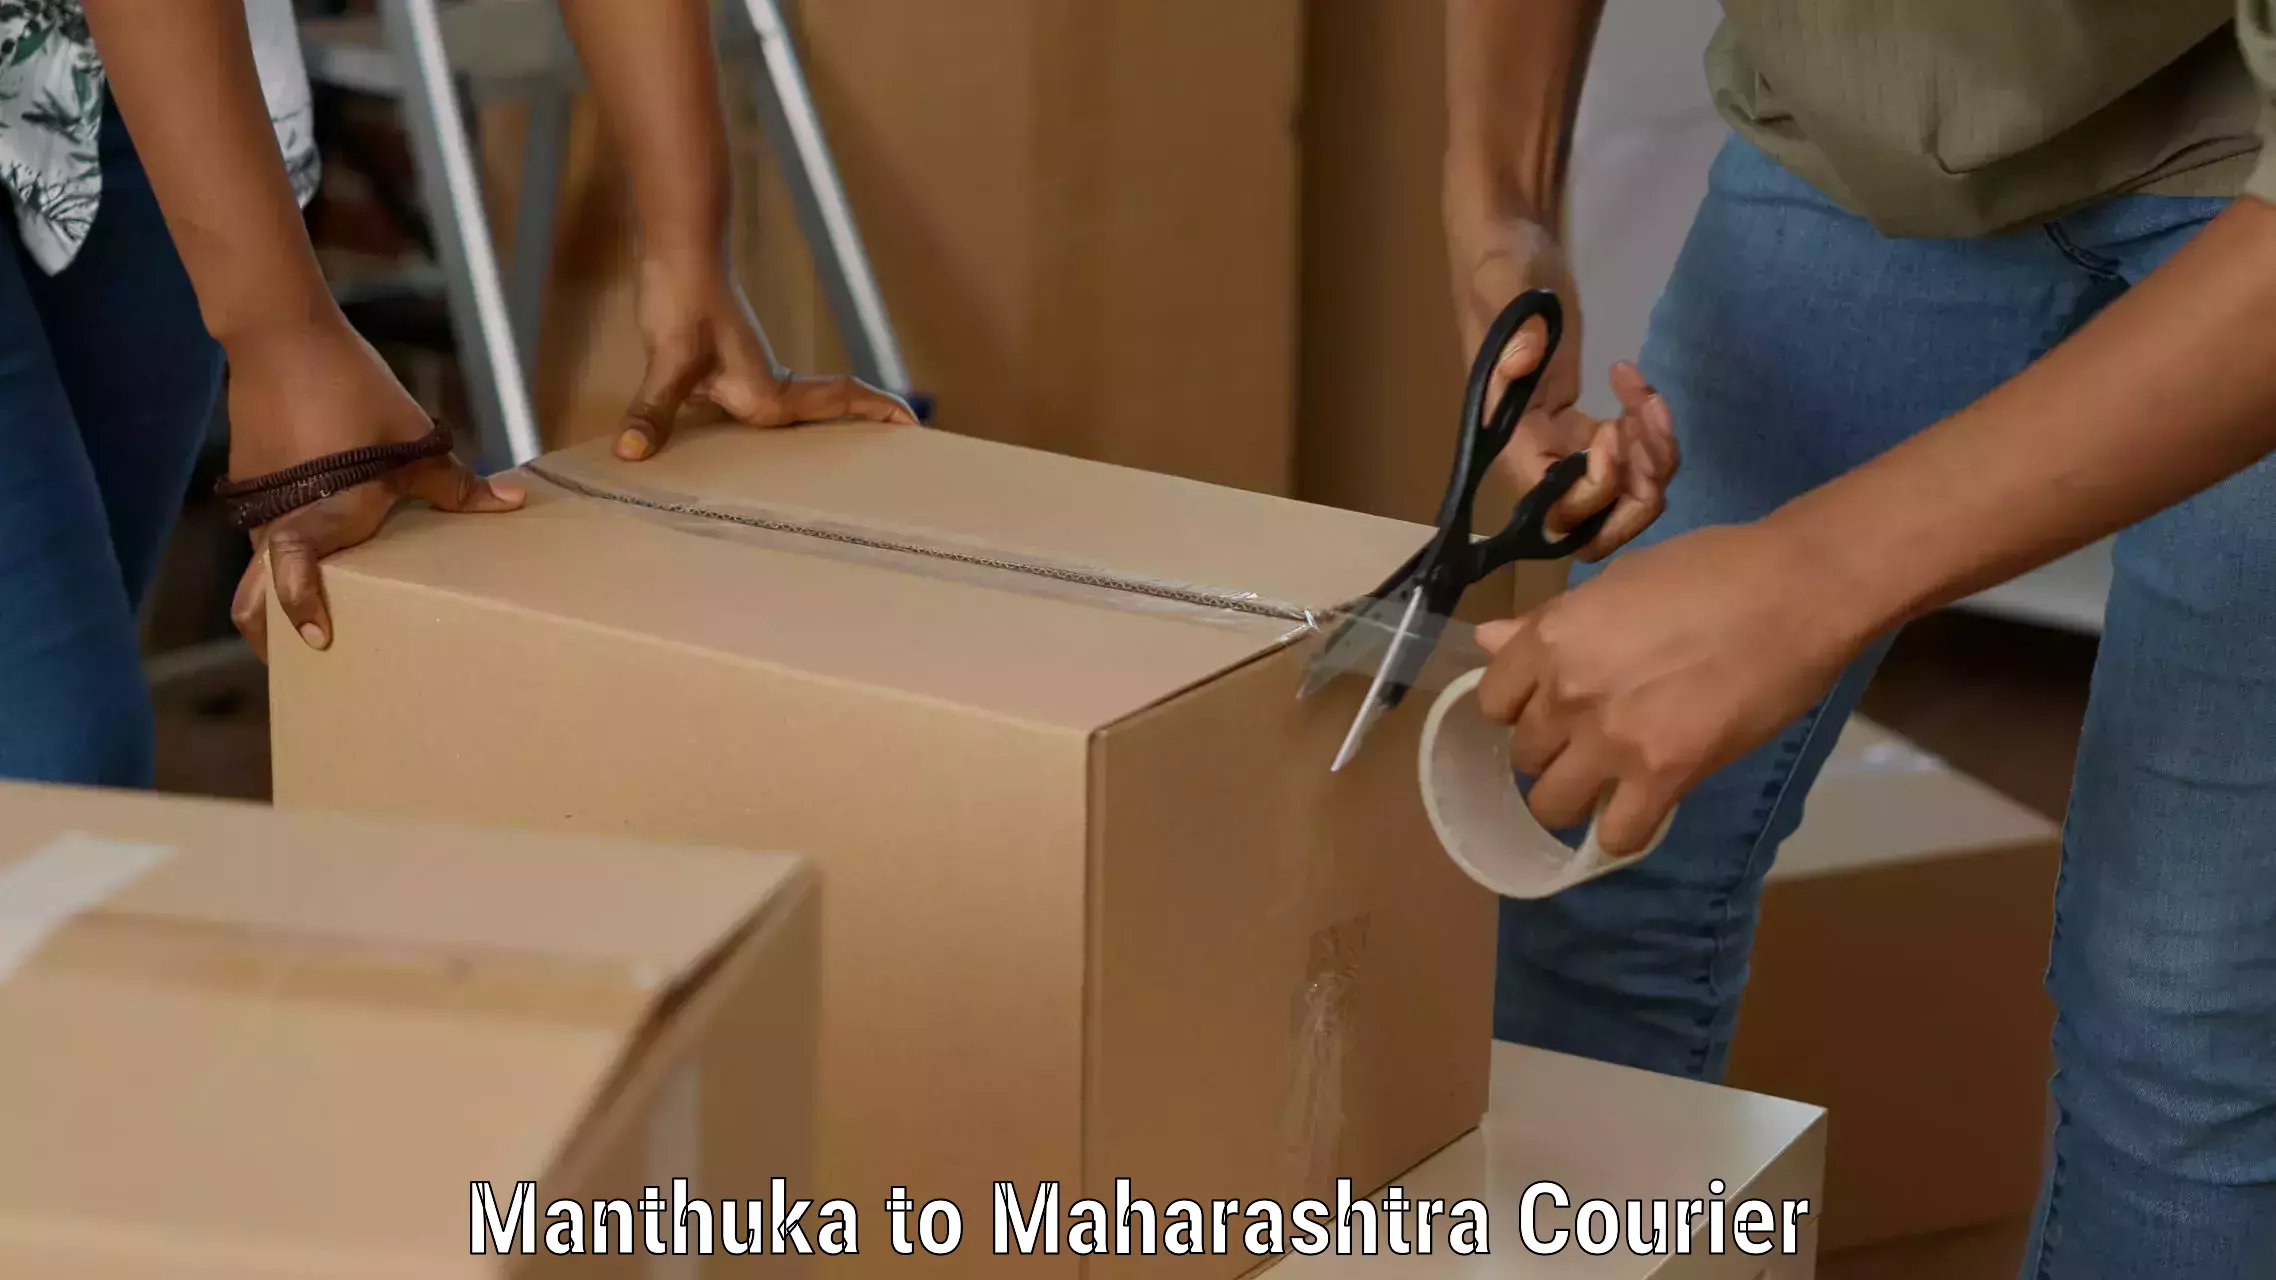 Reliable courier service Manthuka to Jamkhed